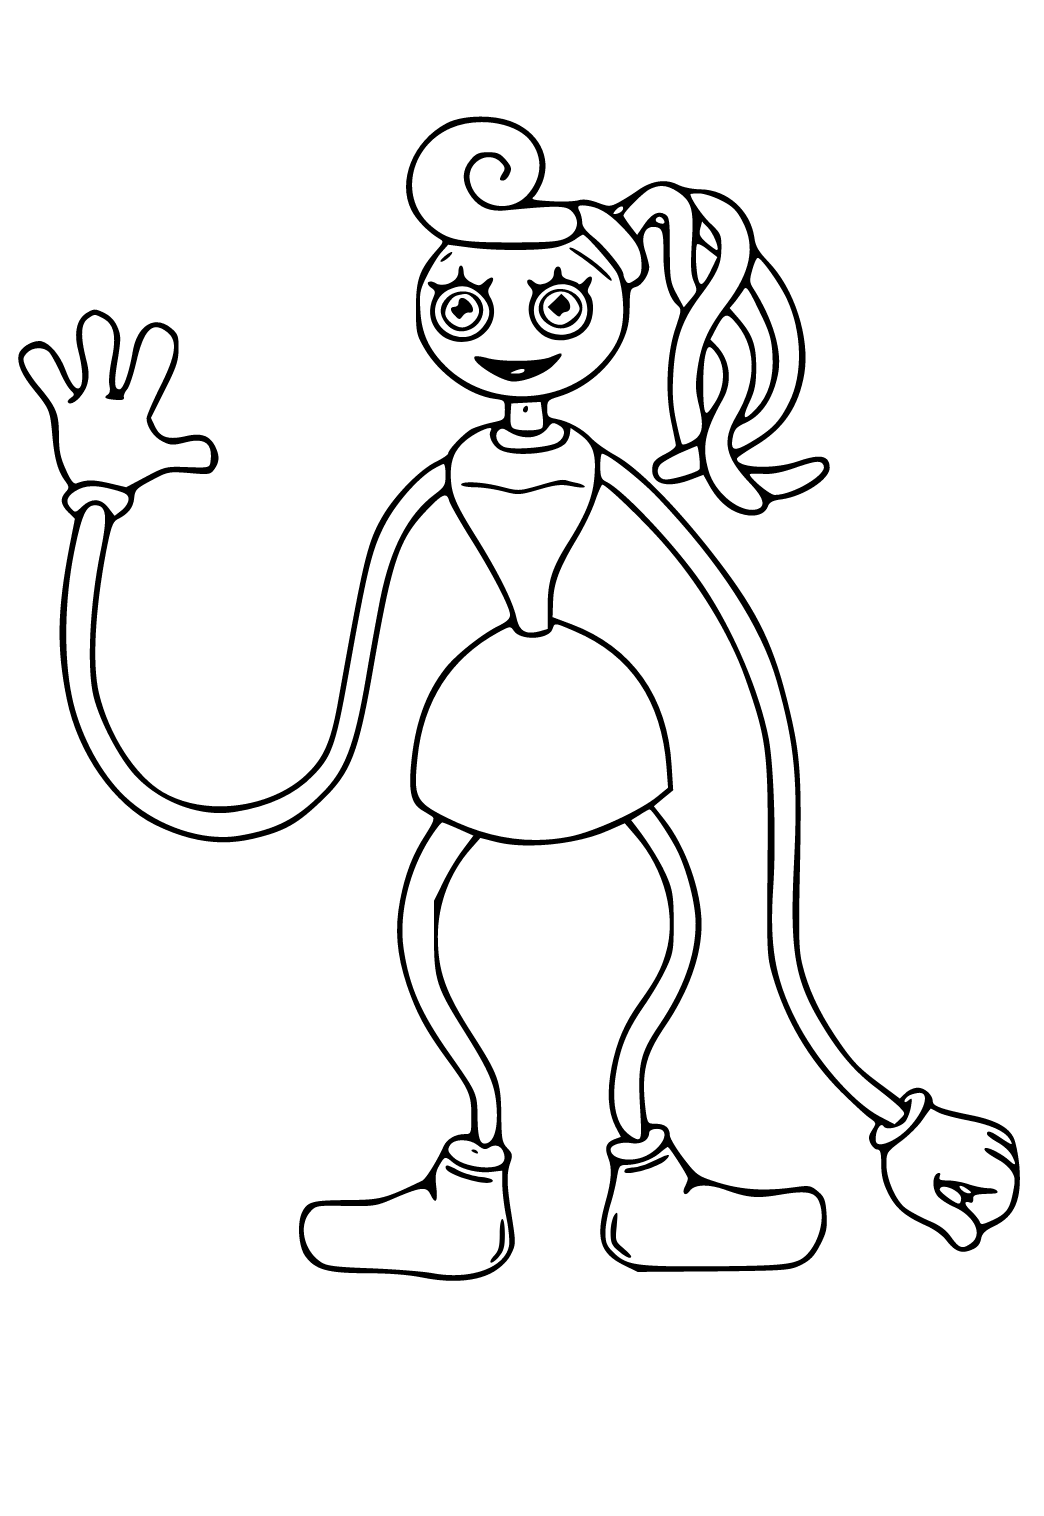 Free Printable Mommy Long Legs Coloring Pages, Sheets and Pictures for  Adults and Kids (Girls and Boys) 